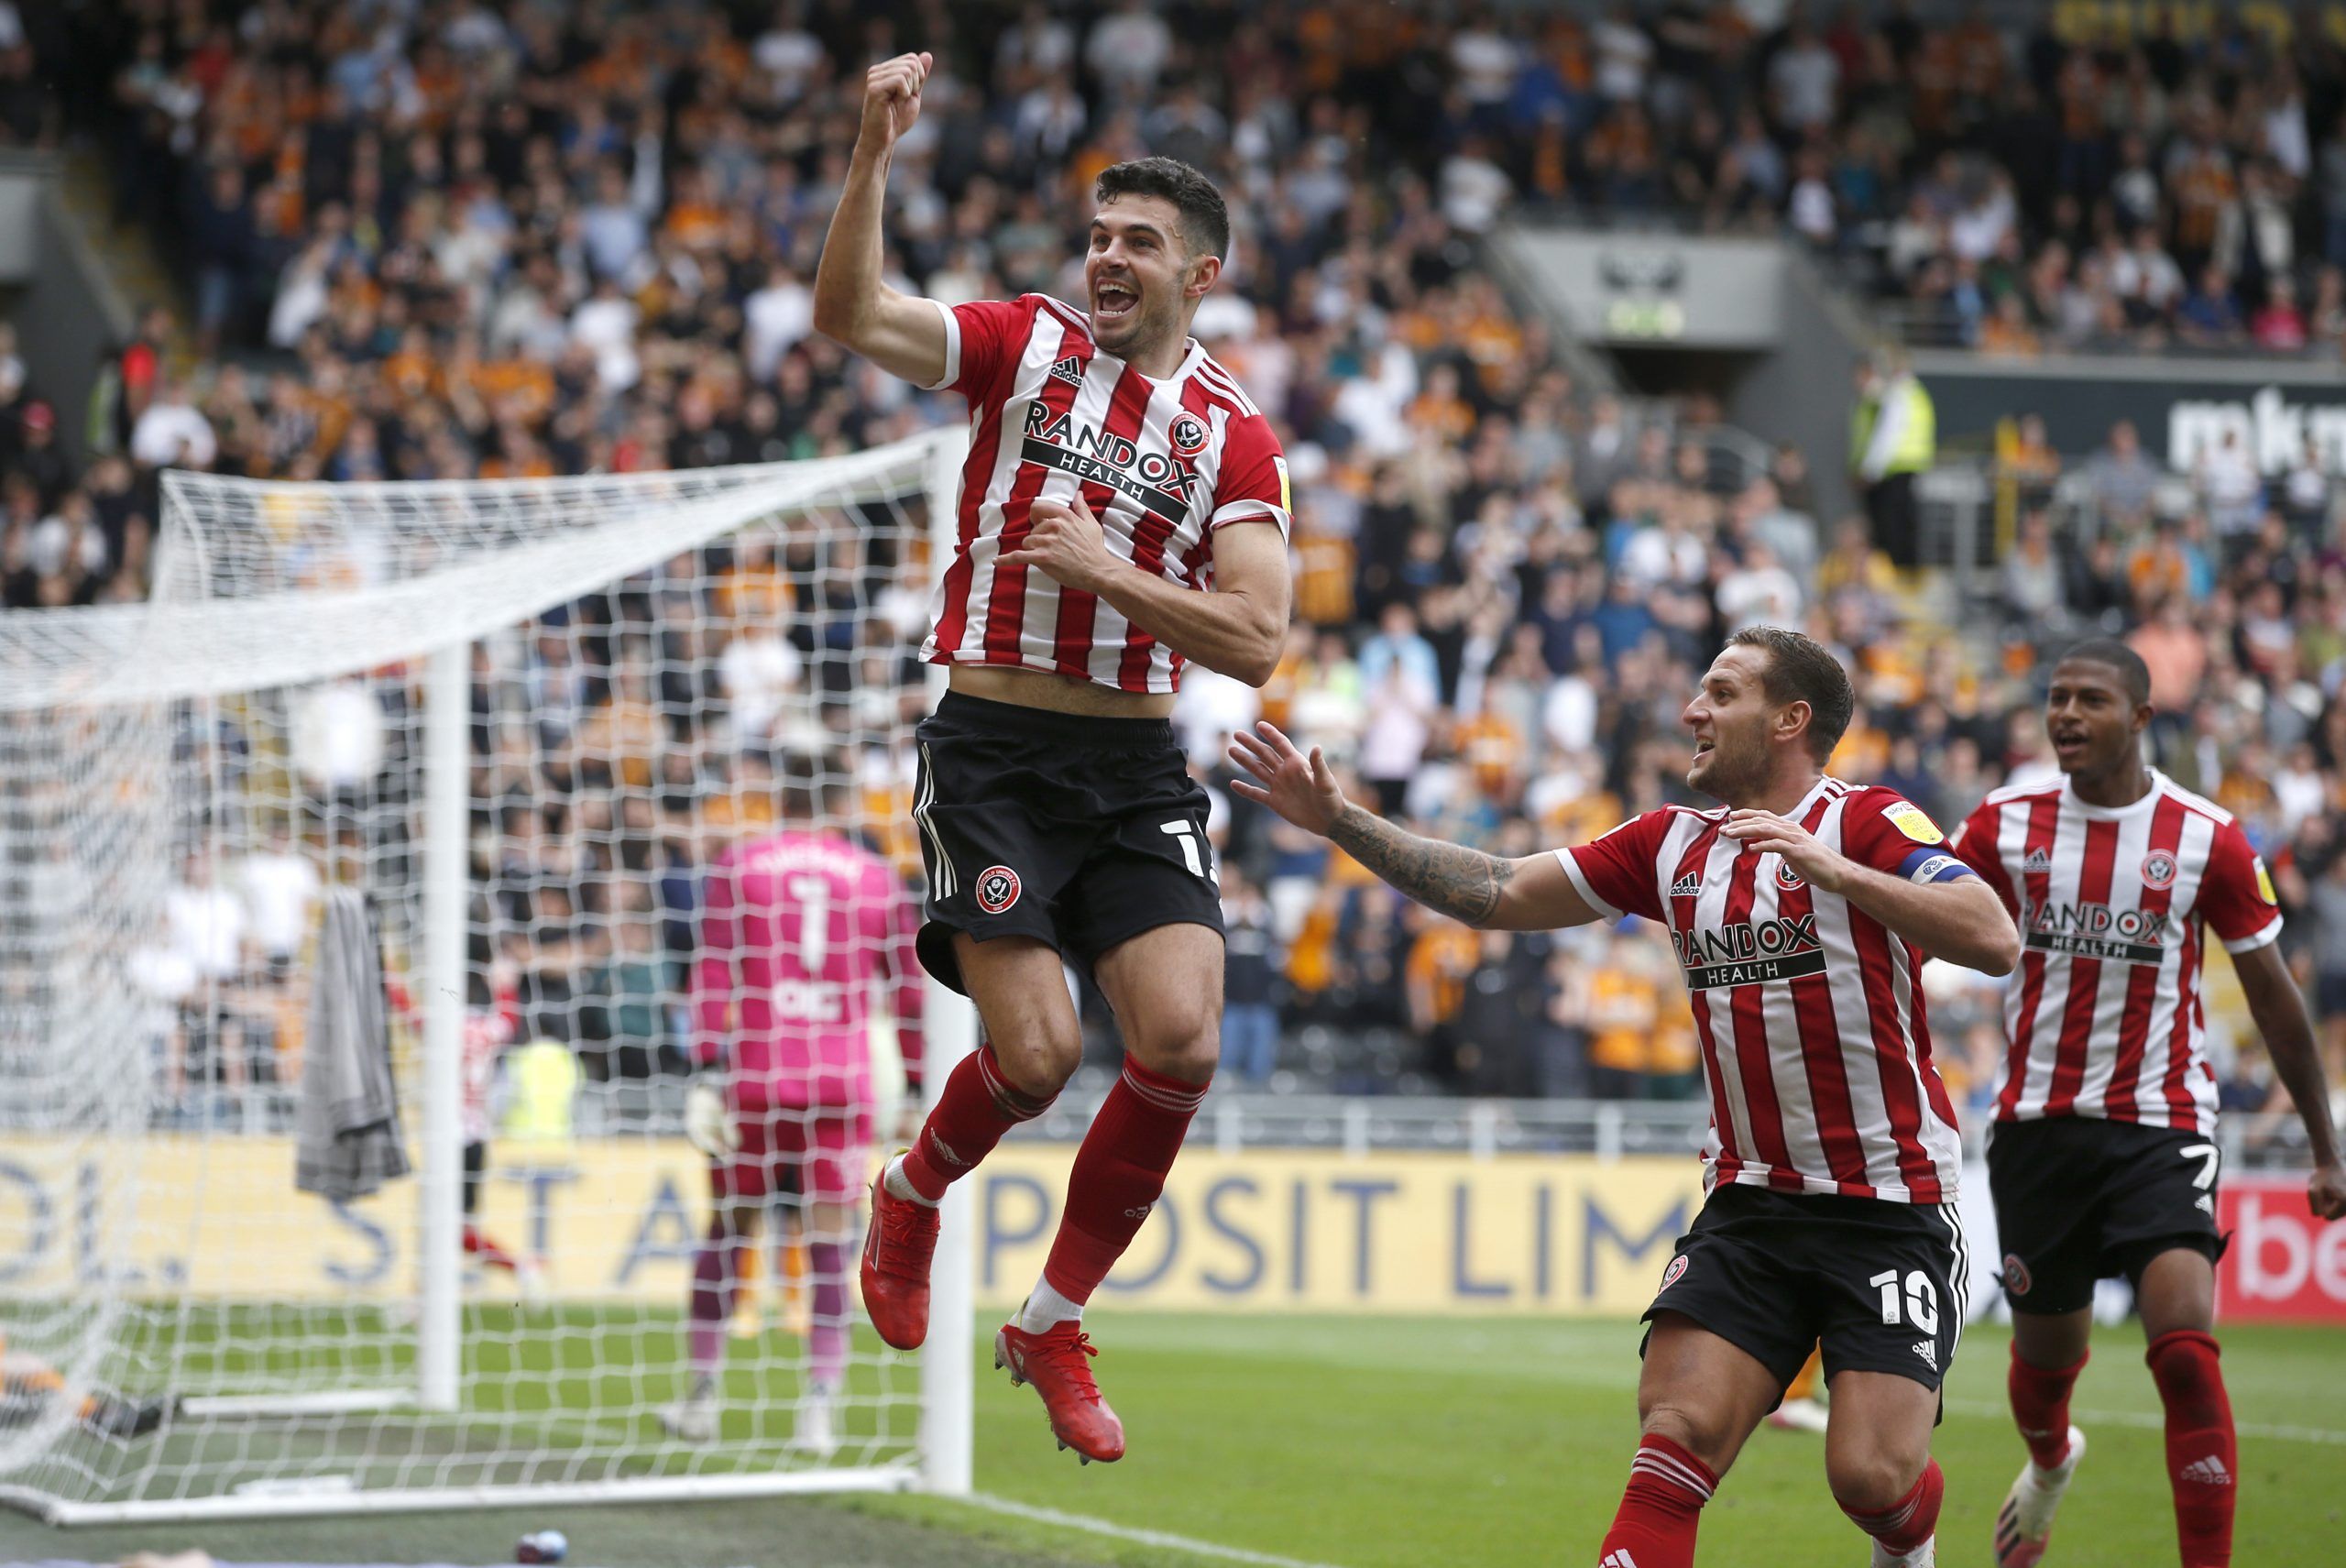 Soccer Football - Championship - Hull City v Sheffield United - KCOM Stadium, Hull, Britain - September 18, 2021 Sheffield United's John Egan celebrates scoring their second goal with teammates Action Images/Ed Sykes EDITORIAL USE ONLY. No use with unauthorized audio, video, data, fixture lists, club/league logos or 'live' services. Online in-match use limited to 75 images, no video emulation. No use in betting, games or single club /league/player publications.  Please contact your account repre